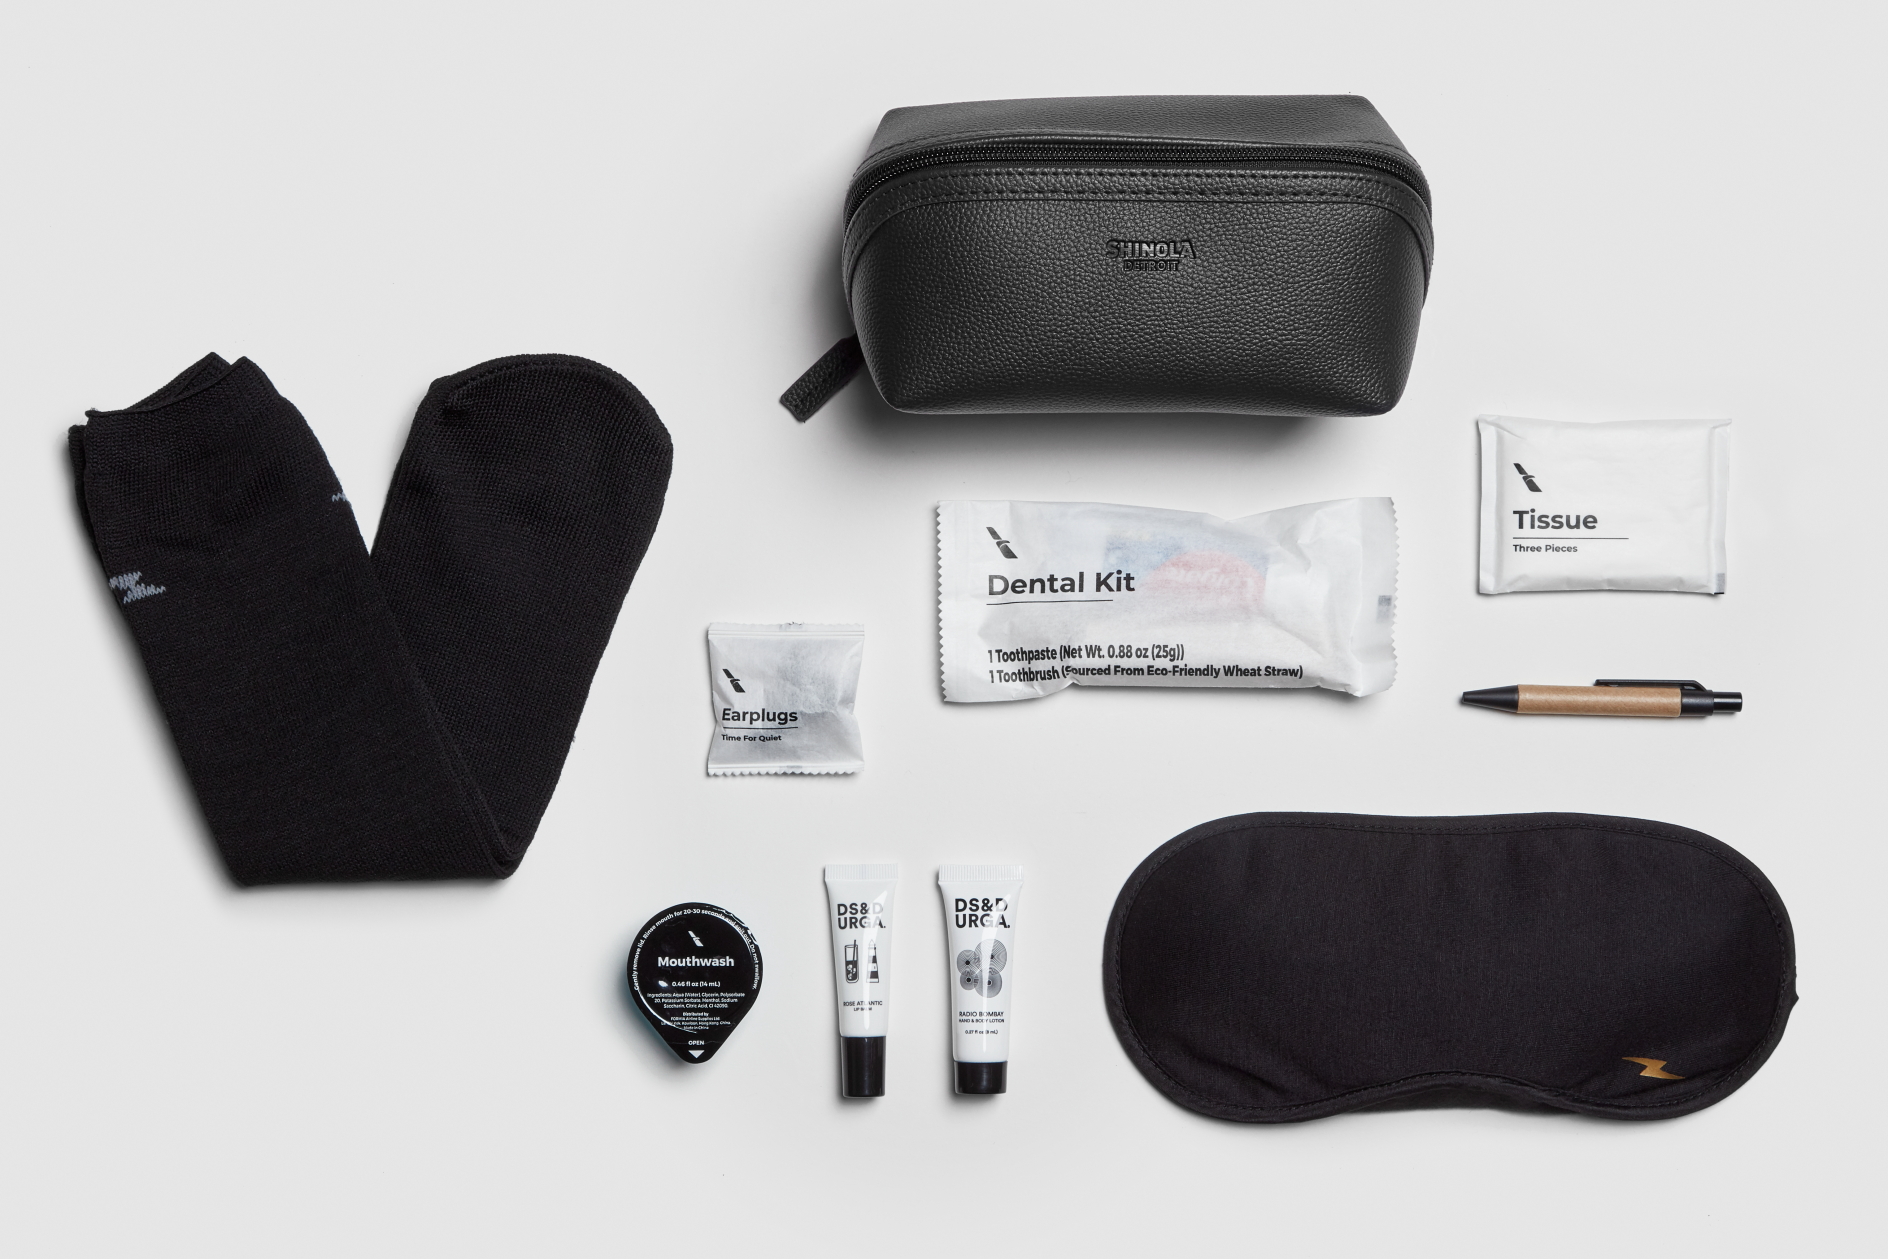 American Airlines Flagship First Kit includes socks, eye mask, lip balm, hand & body lotion, earplugs, dental kit, mouthwash, tissues and a pen. Click to enlarge.